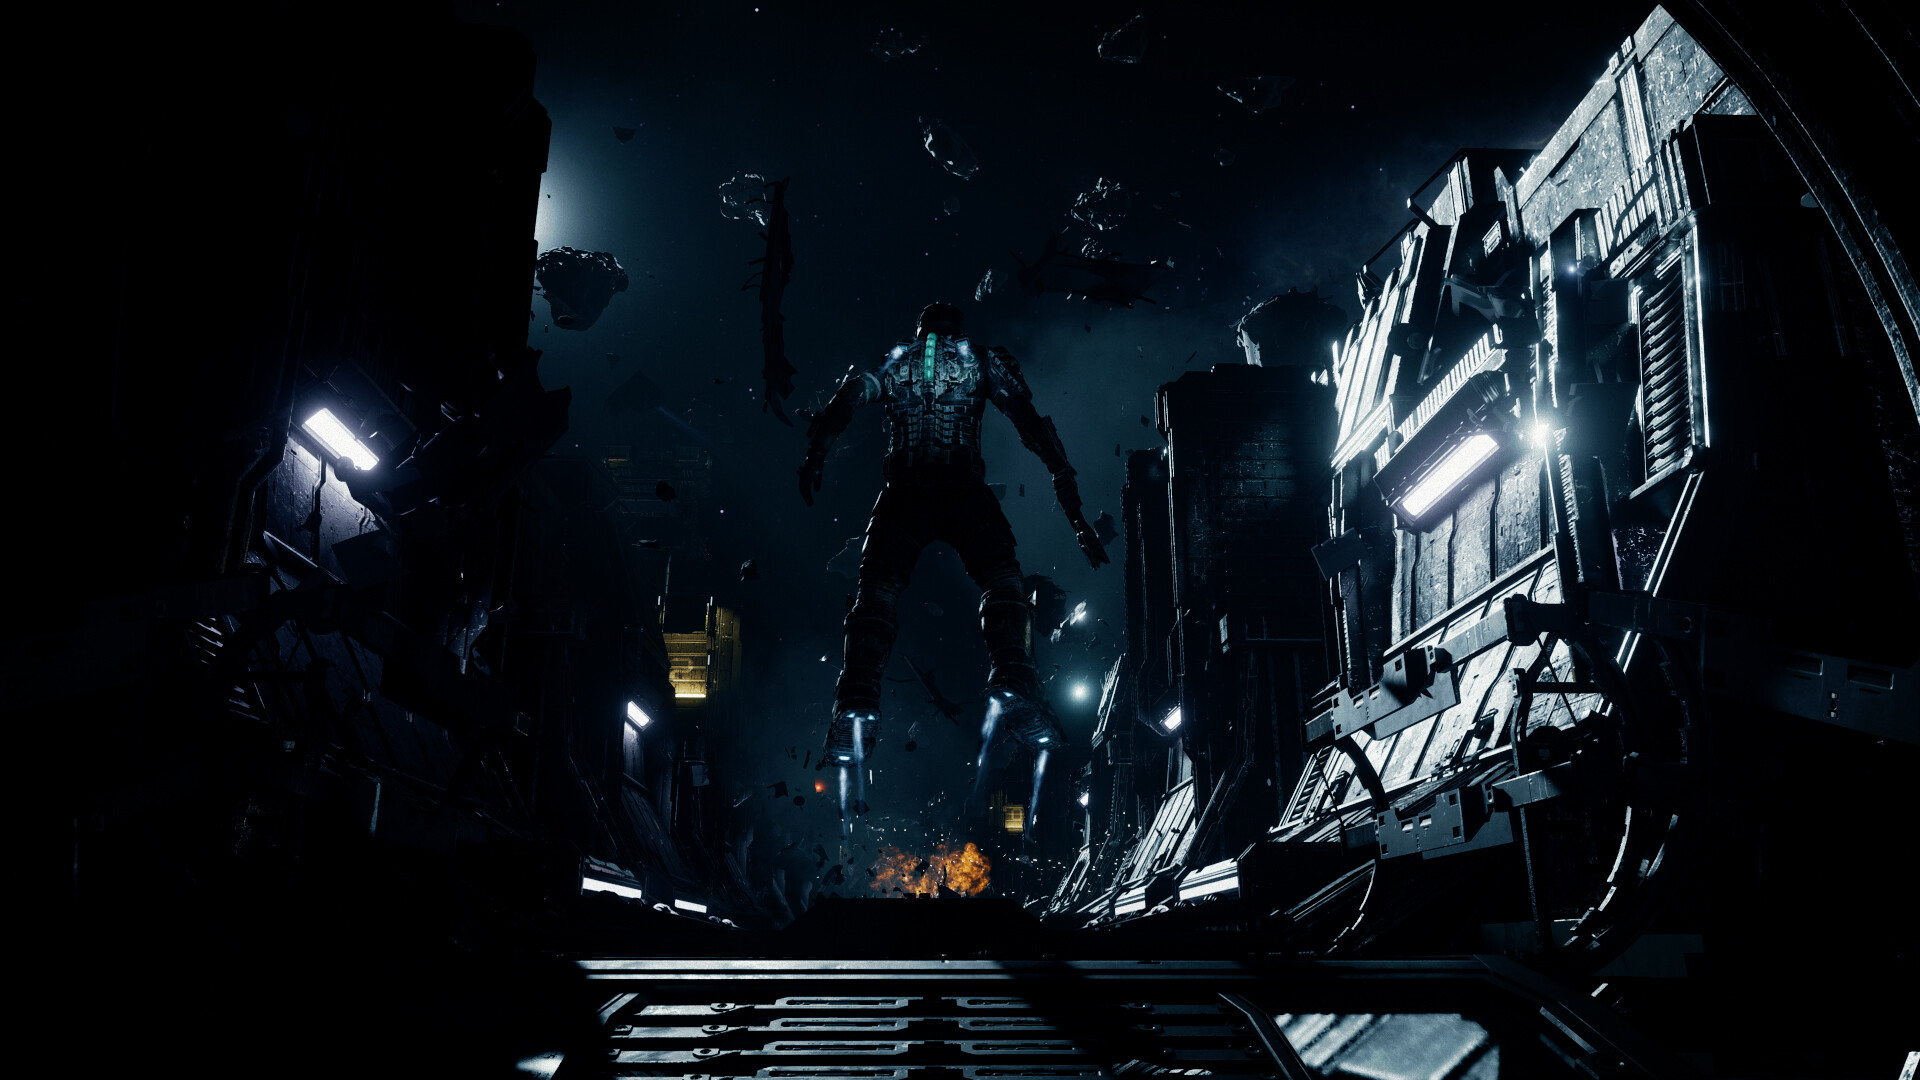 Dead Space Digital Deluxe Edition Upgrade Featured Screenshot #1